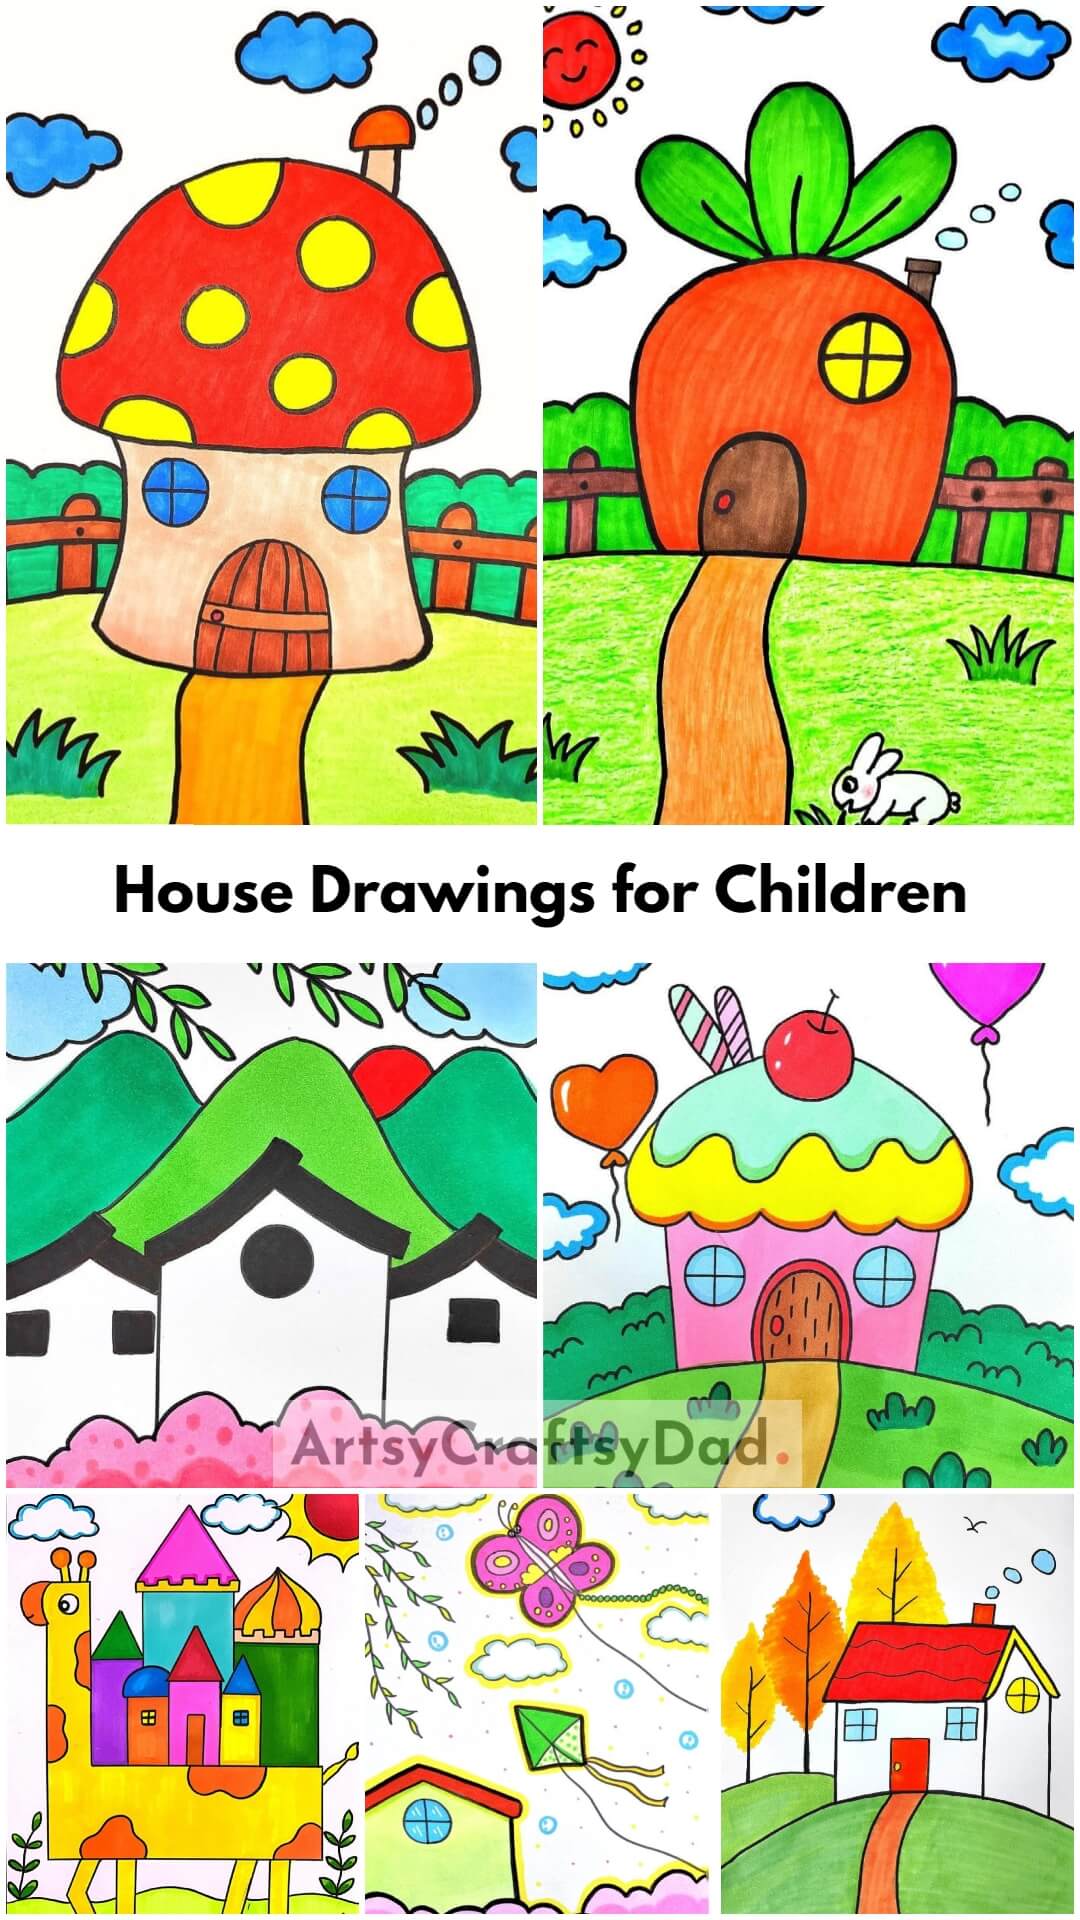 House Drawings for Children